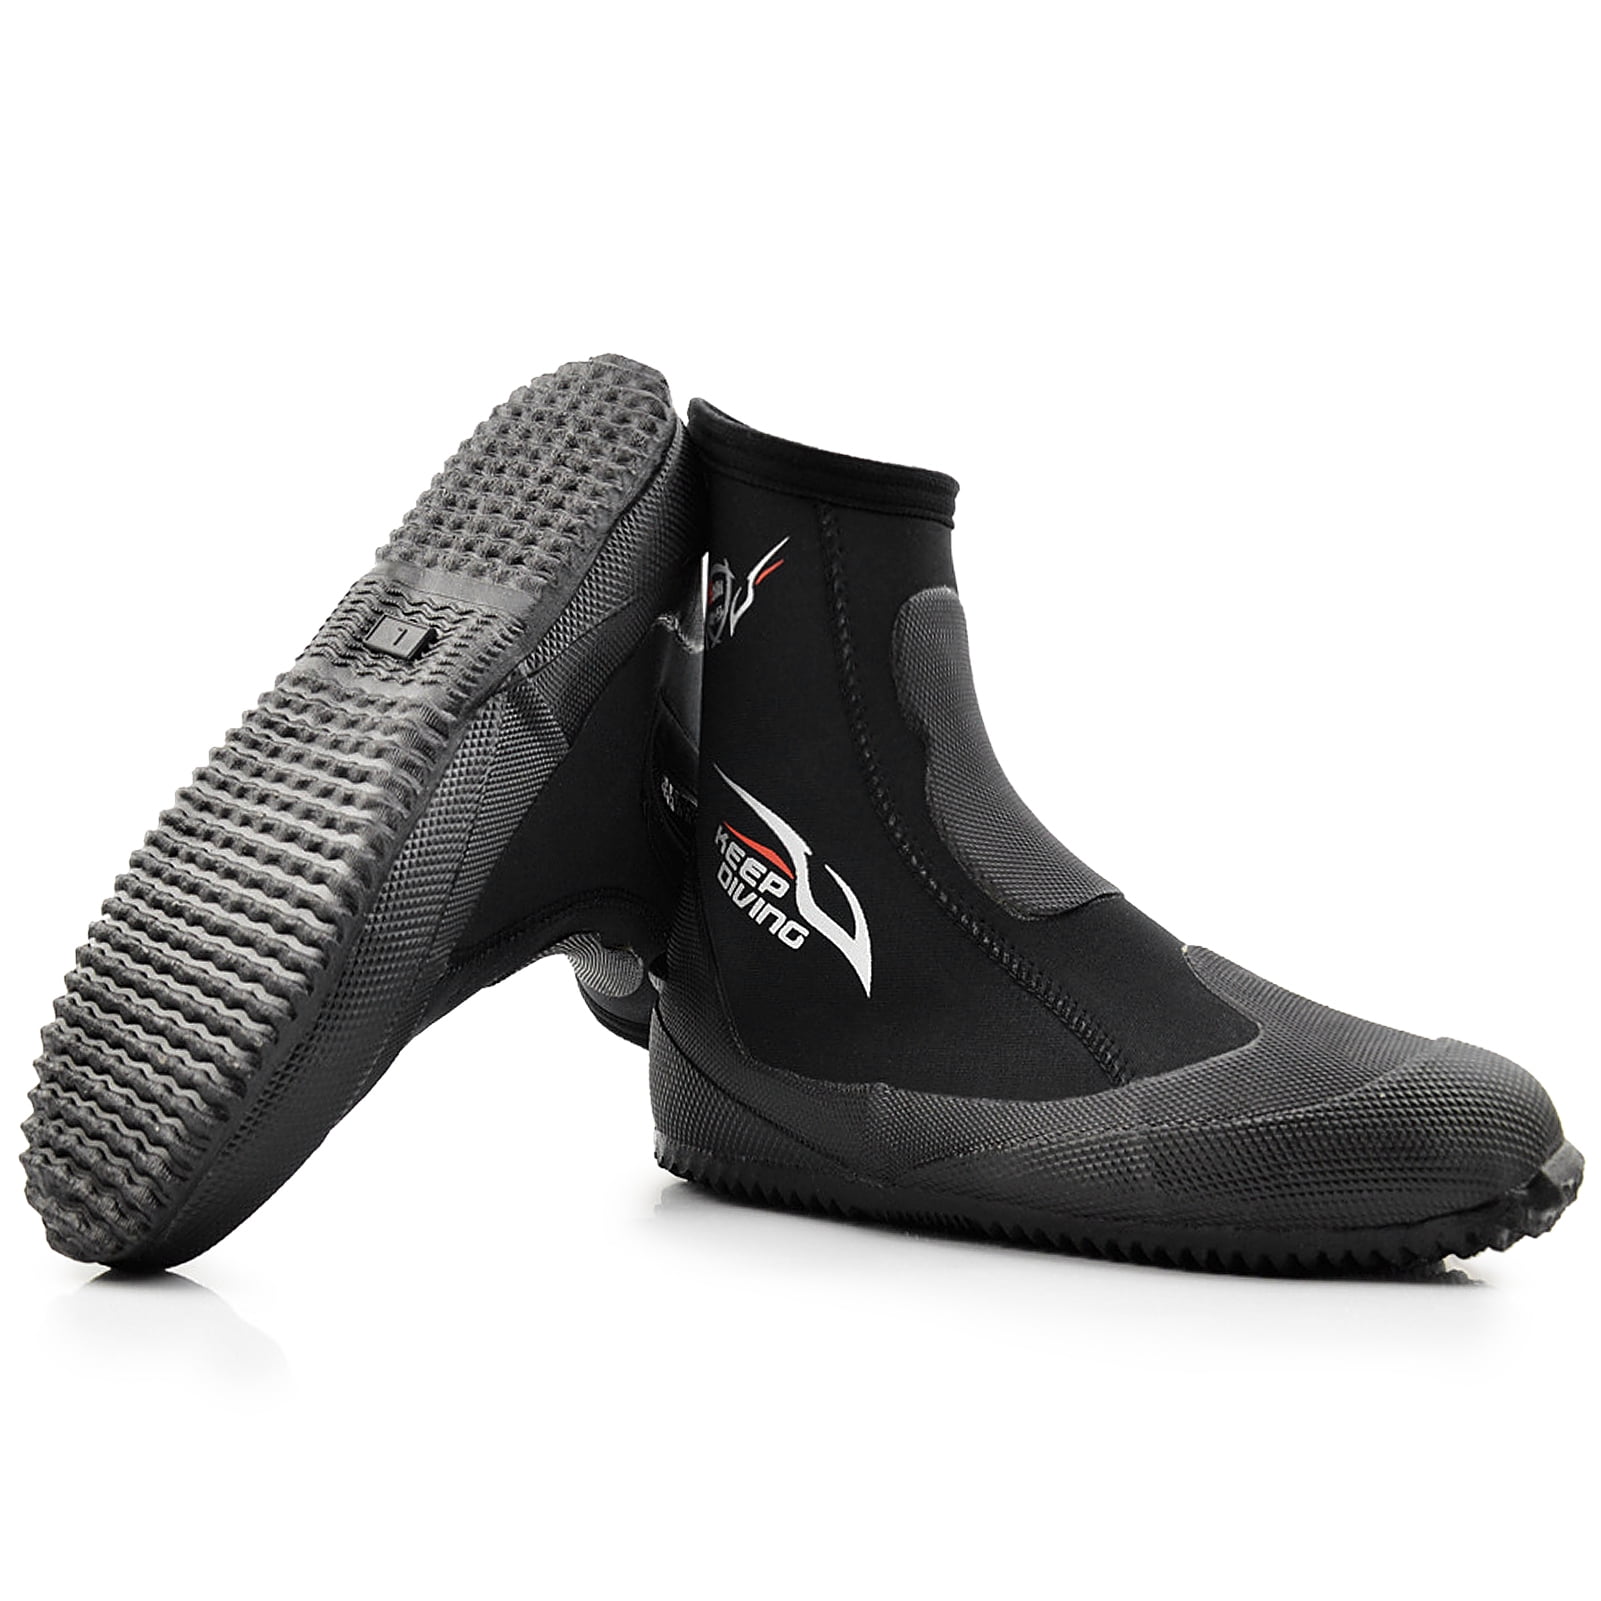 Diving Shoes 5mm Neoprene Beach Water Shoes Thermal Wetsuit Boots Slip ...